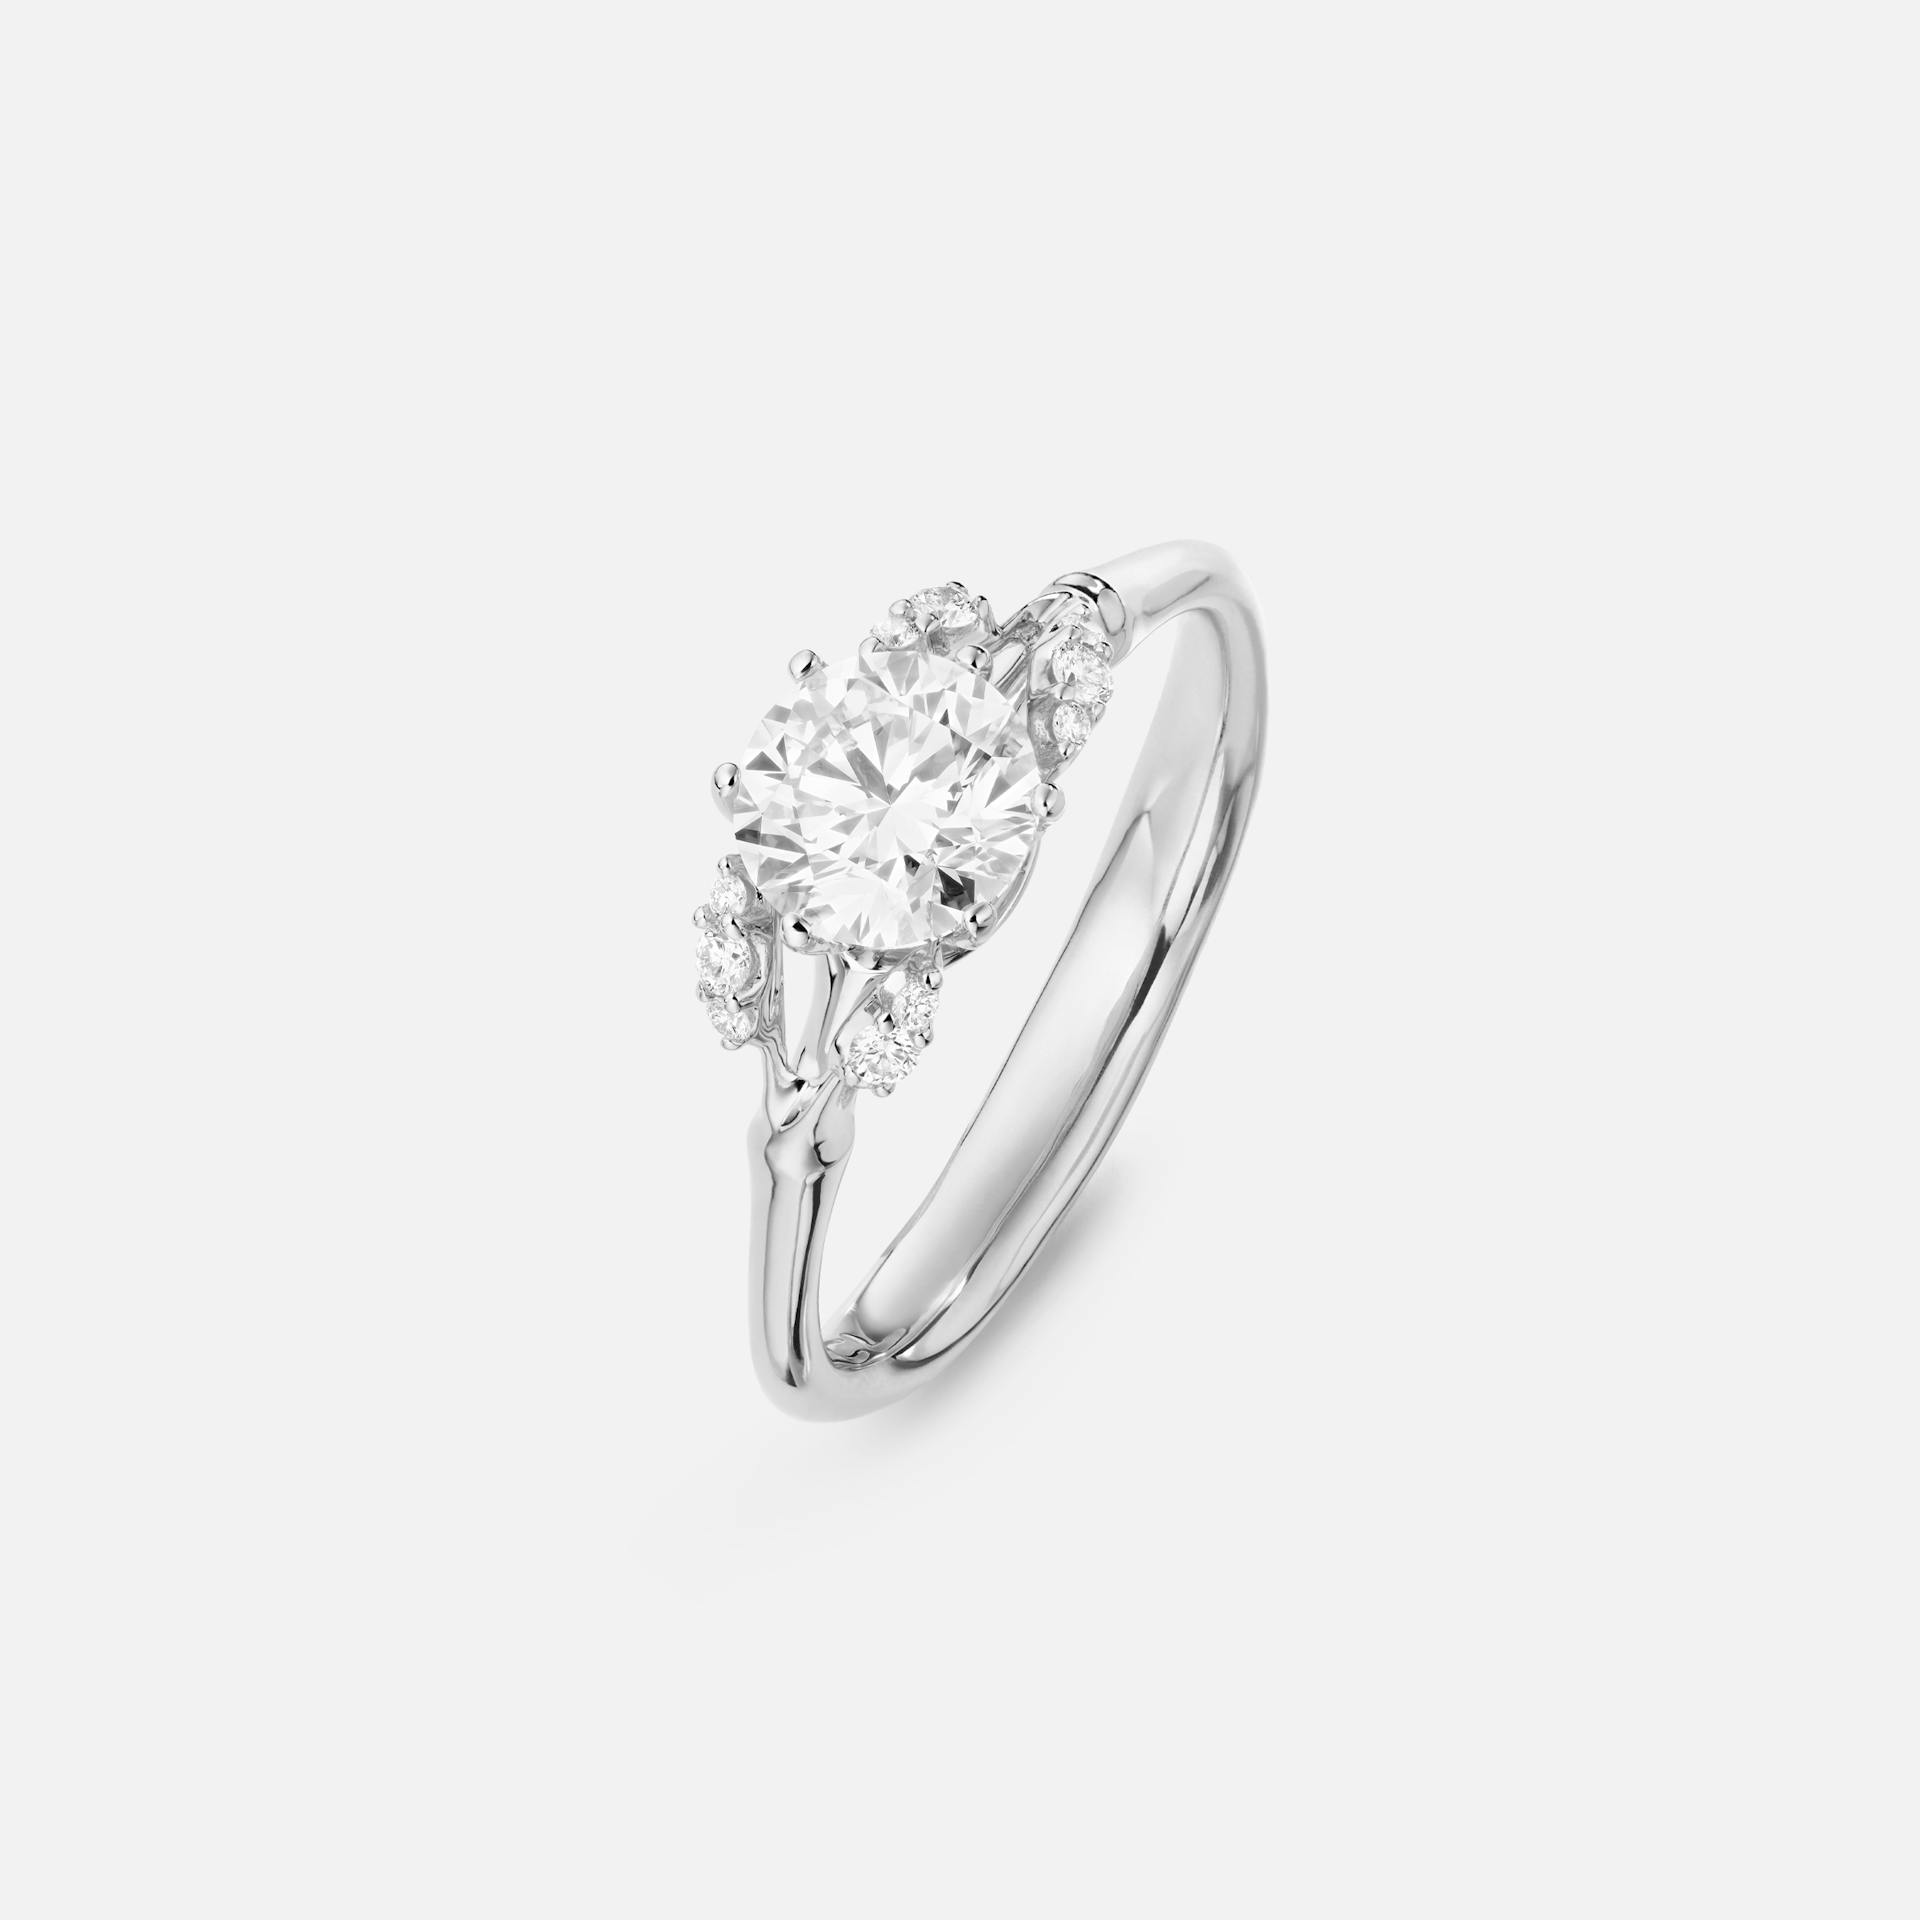 Winter Frost solitaire ring